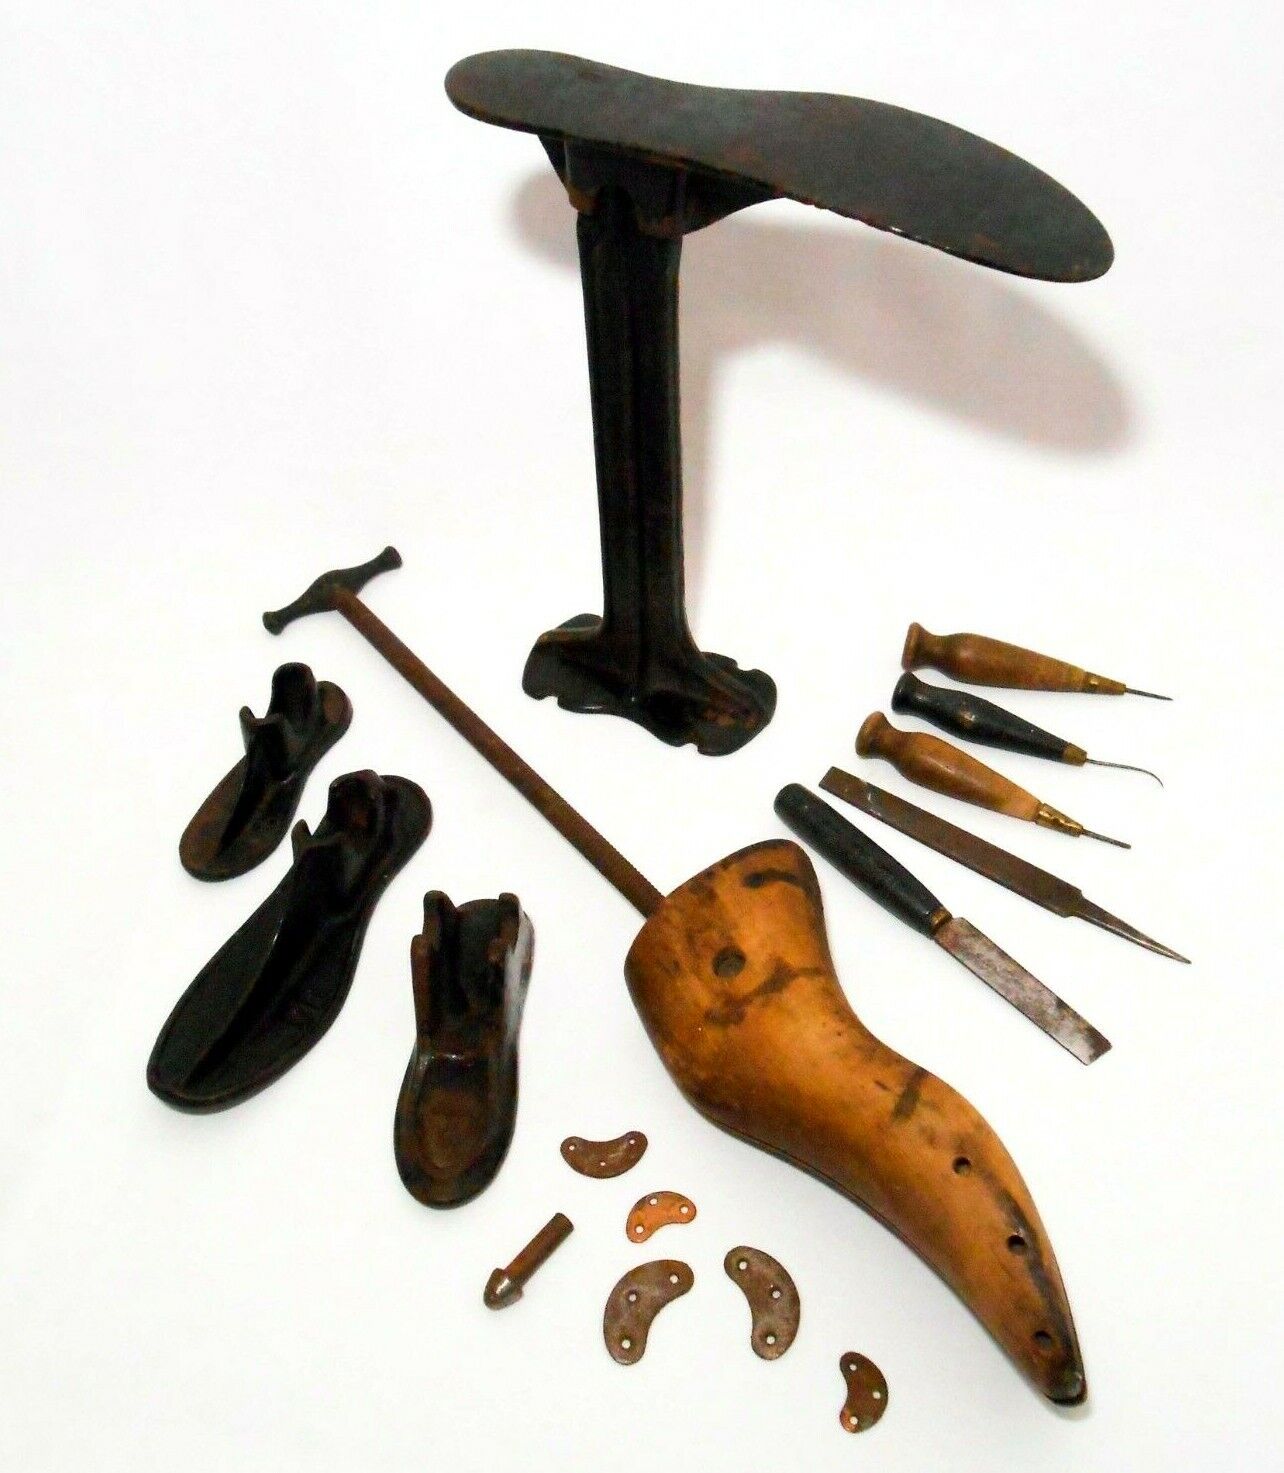 LATE 19THEARLY 20TH C ANTIQUE CAST IRON amp WOOD COBBLER039S SHOE  REPAIR TOOL SET  eBay